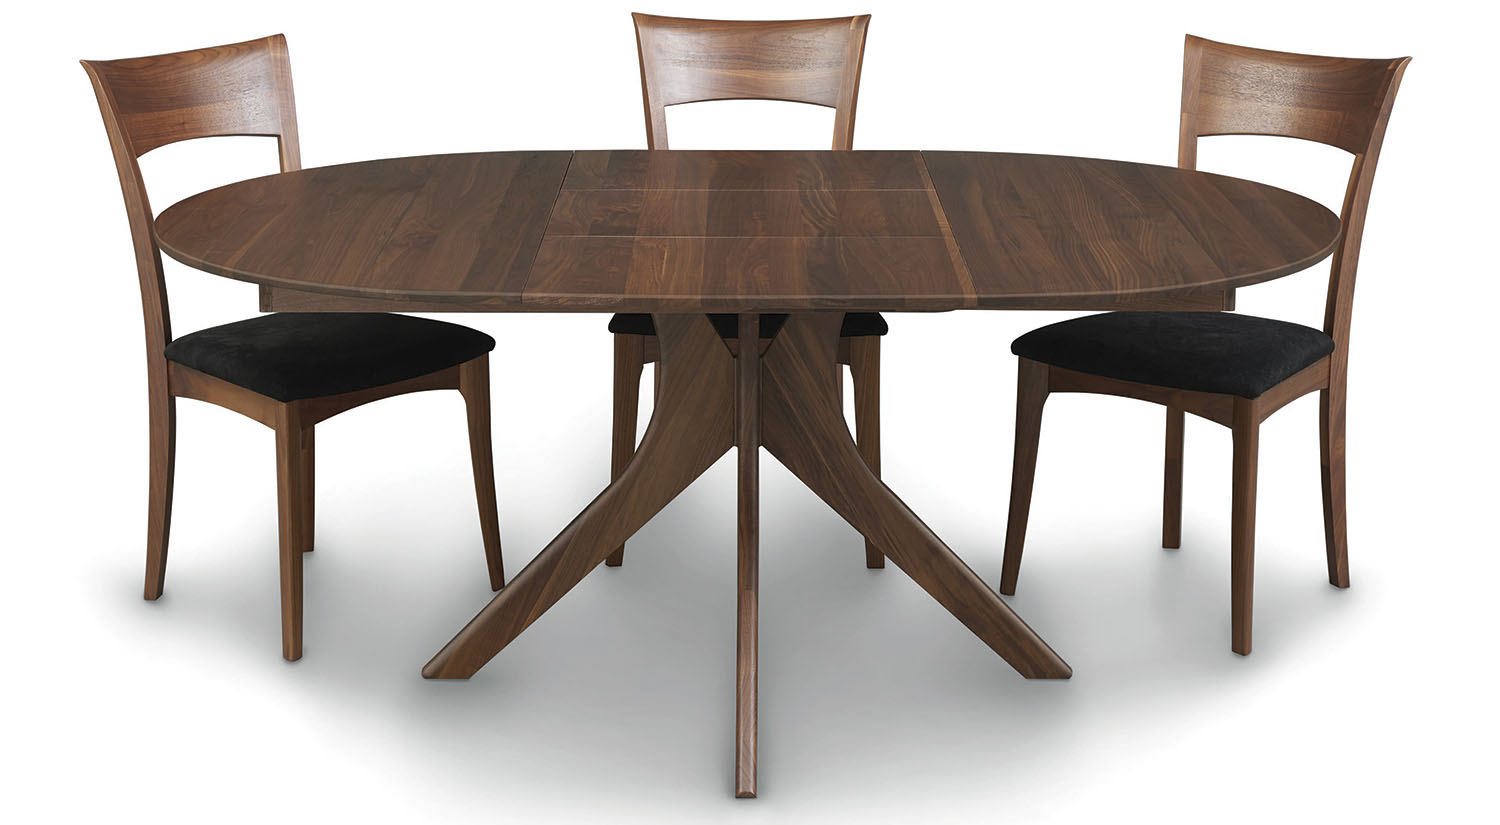 Copeland Furniture : Natural Hardwood Furniture from Vermont : Audrey Round  Extension Table in Cherry